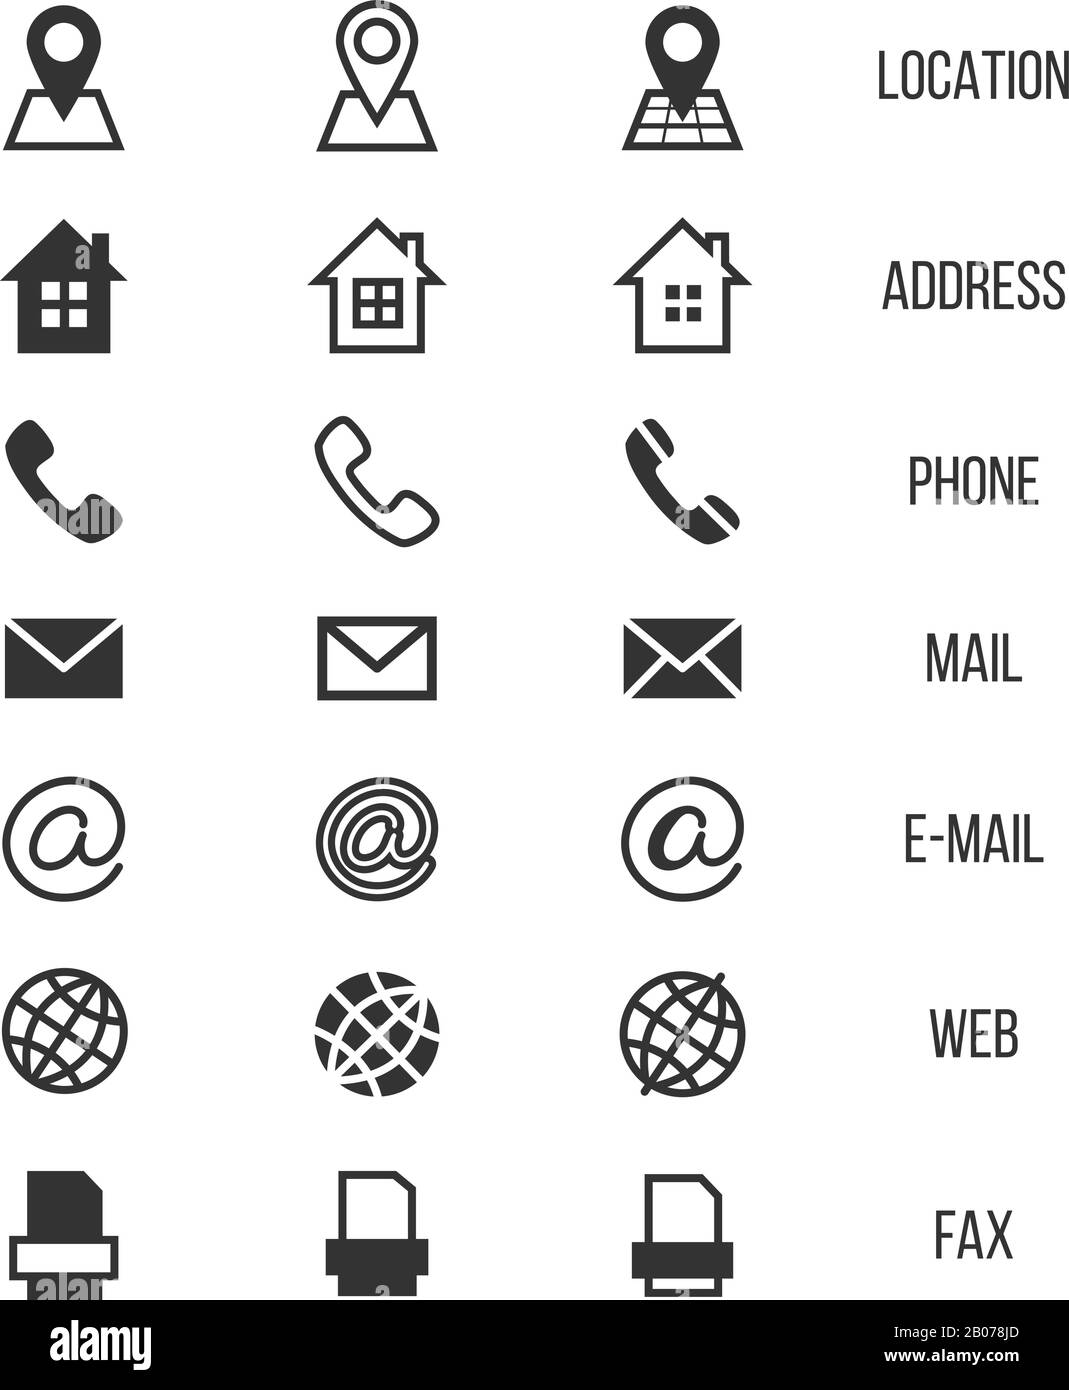 Business card vector icons, home and phone, address and telephone, fax and web, location symbols. Contact of telephone for communication illustration Stock Vector